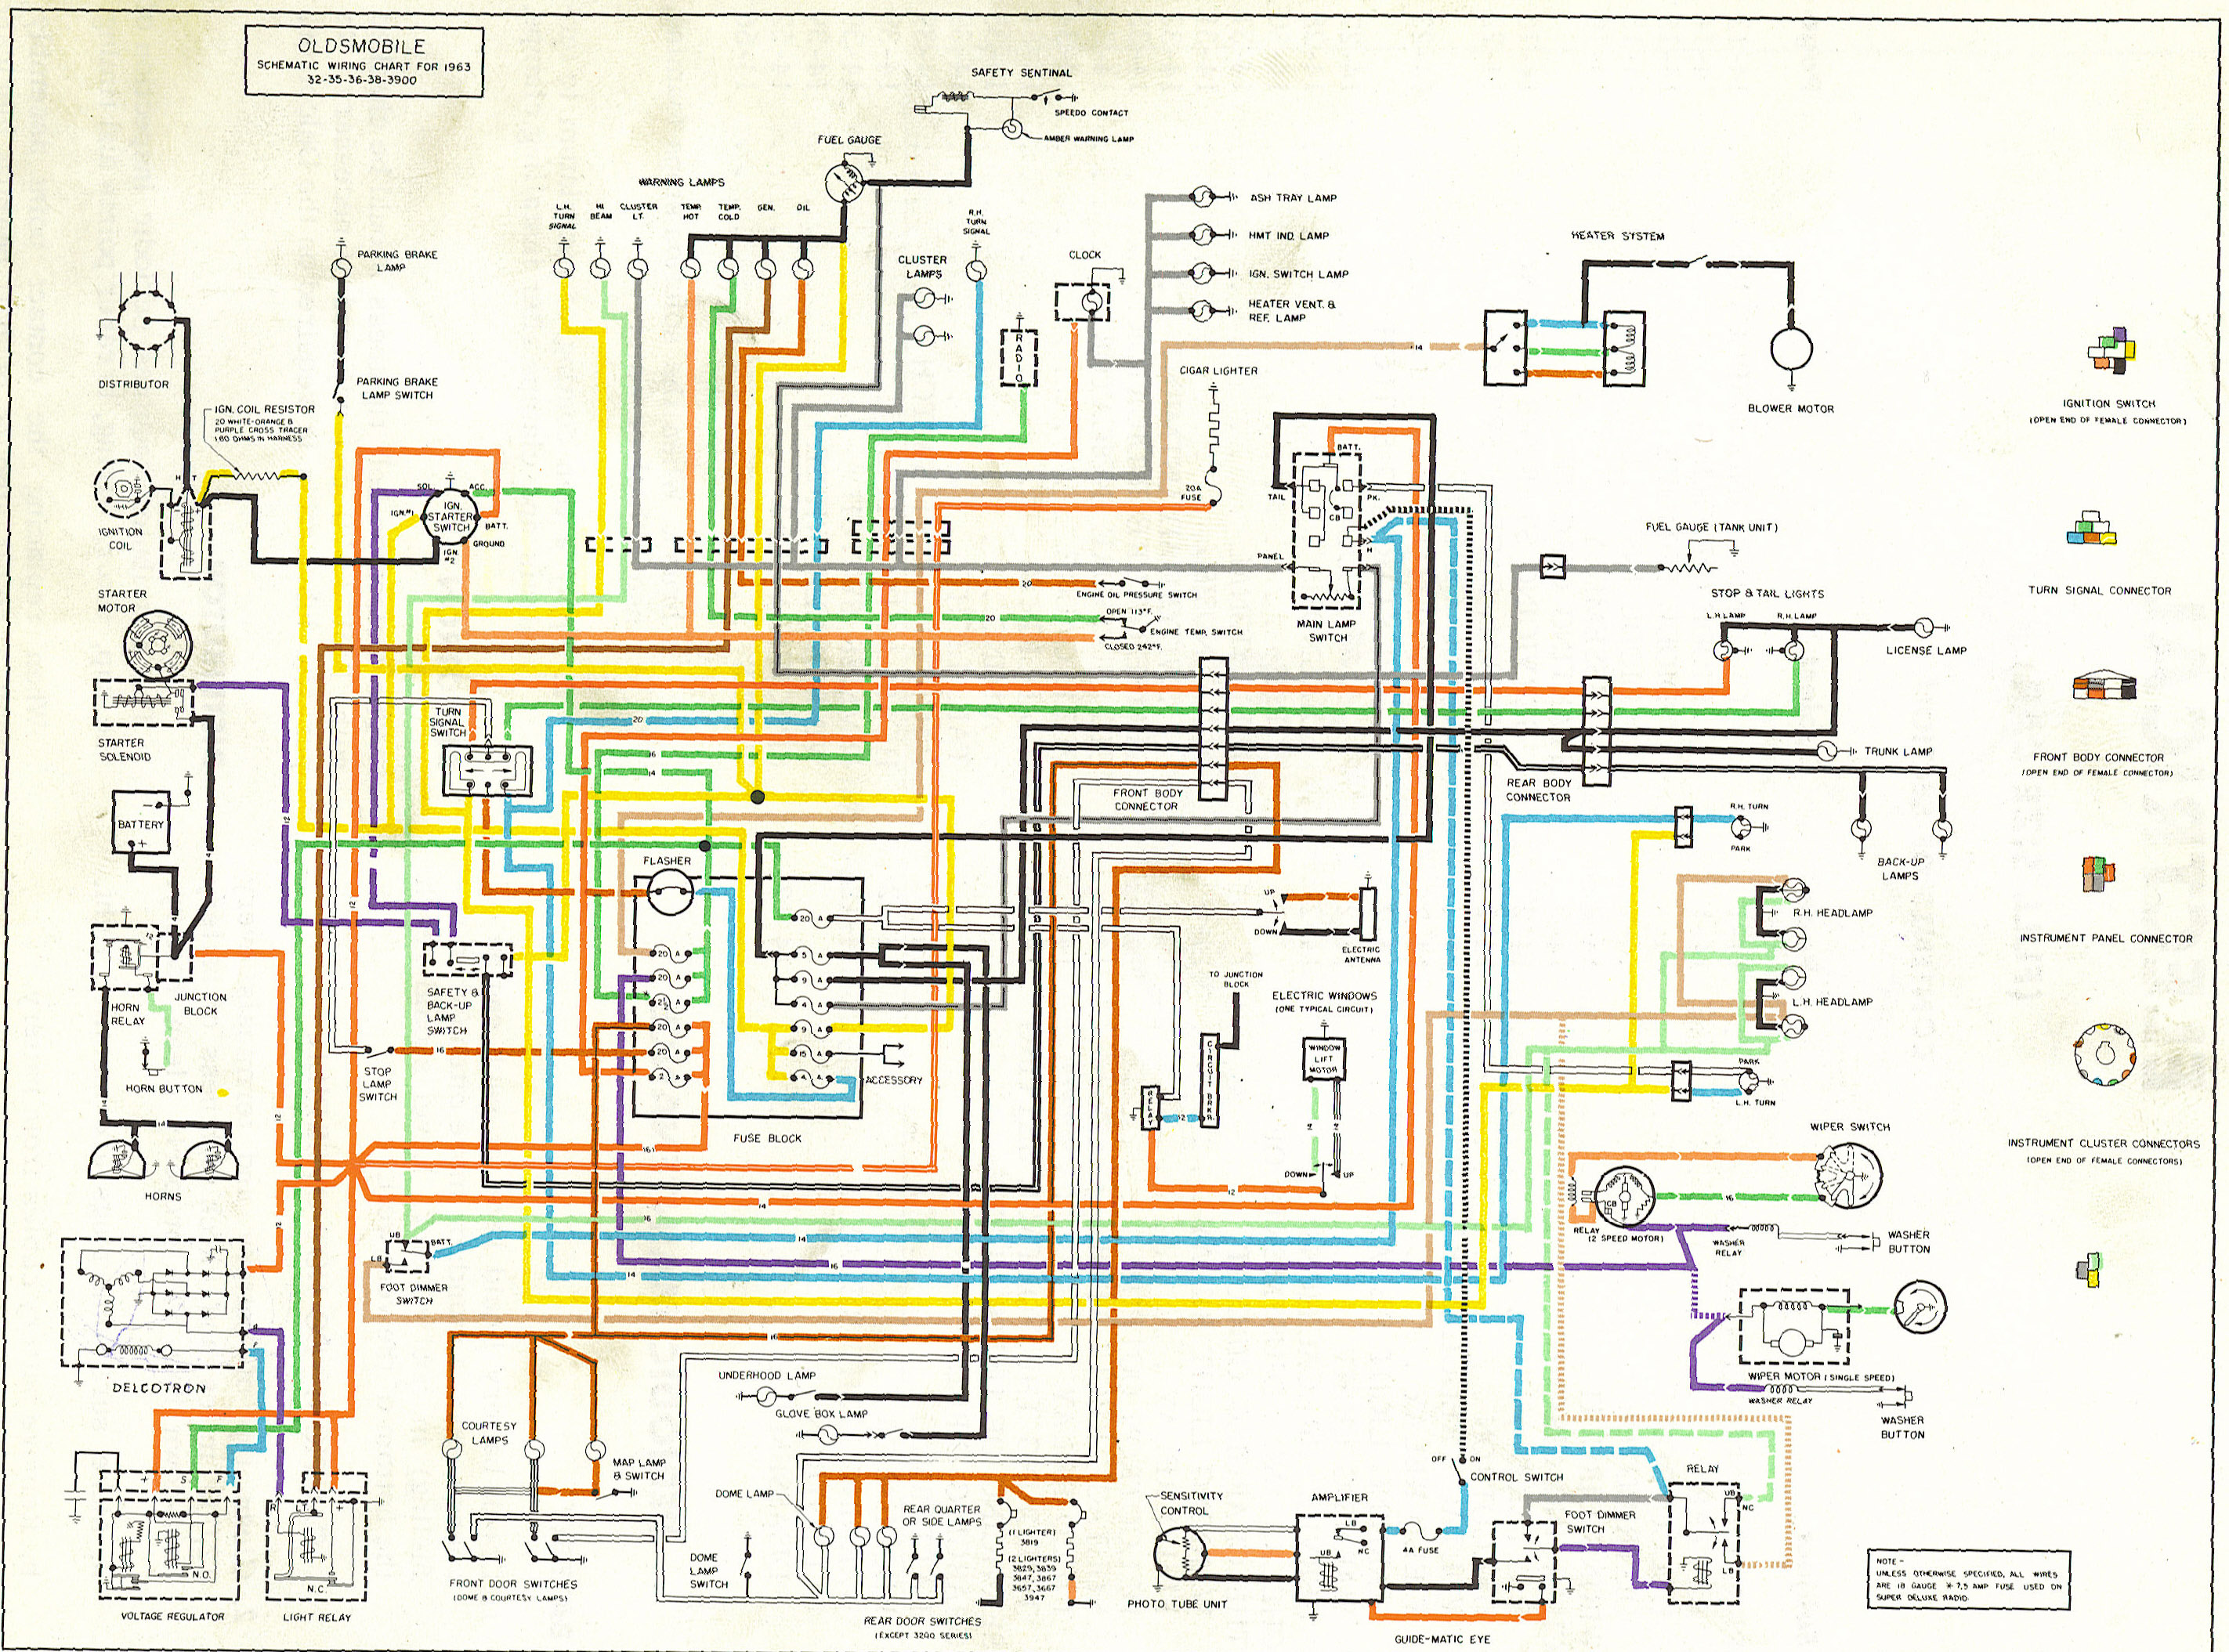 Oldsmobile Wiring Diagrams The Old